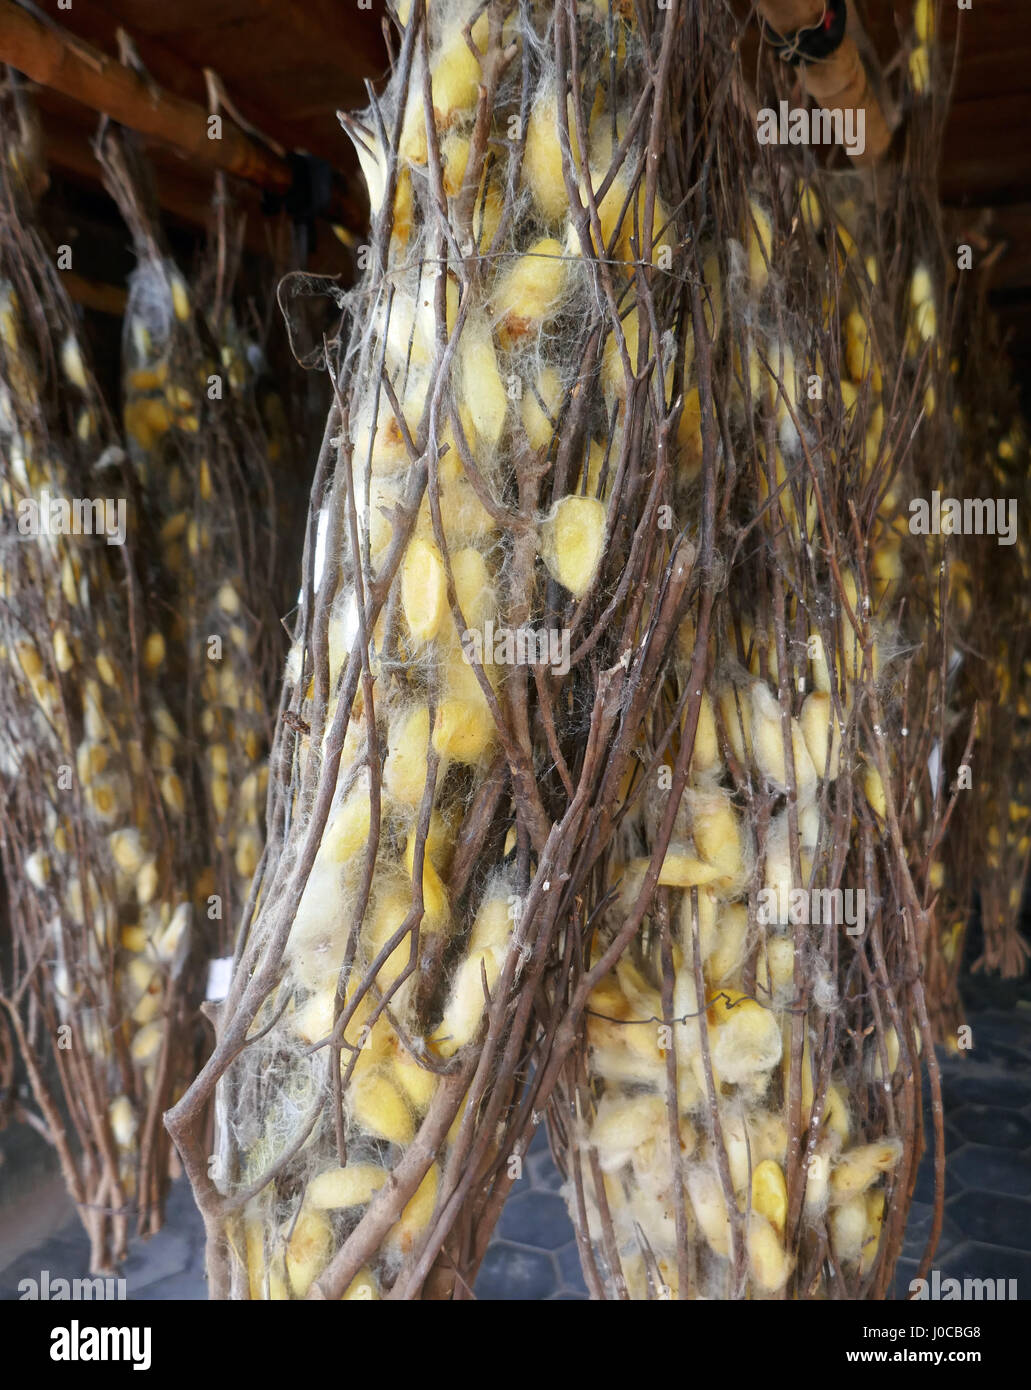 Cocoons of silkworms Stock Photo